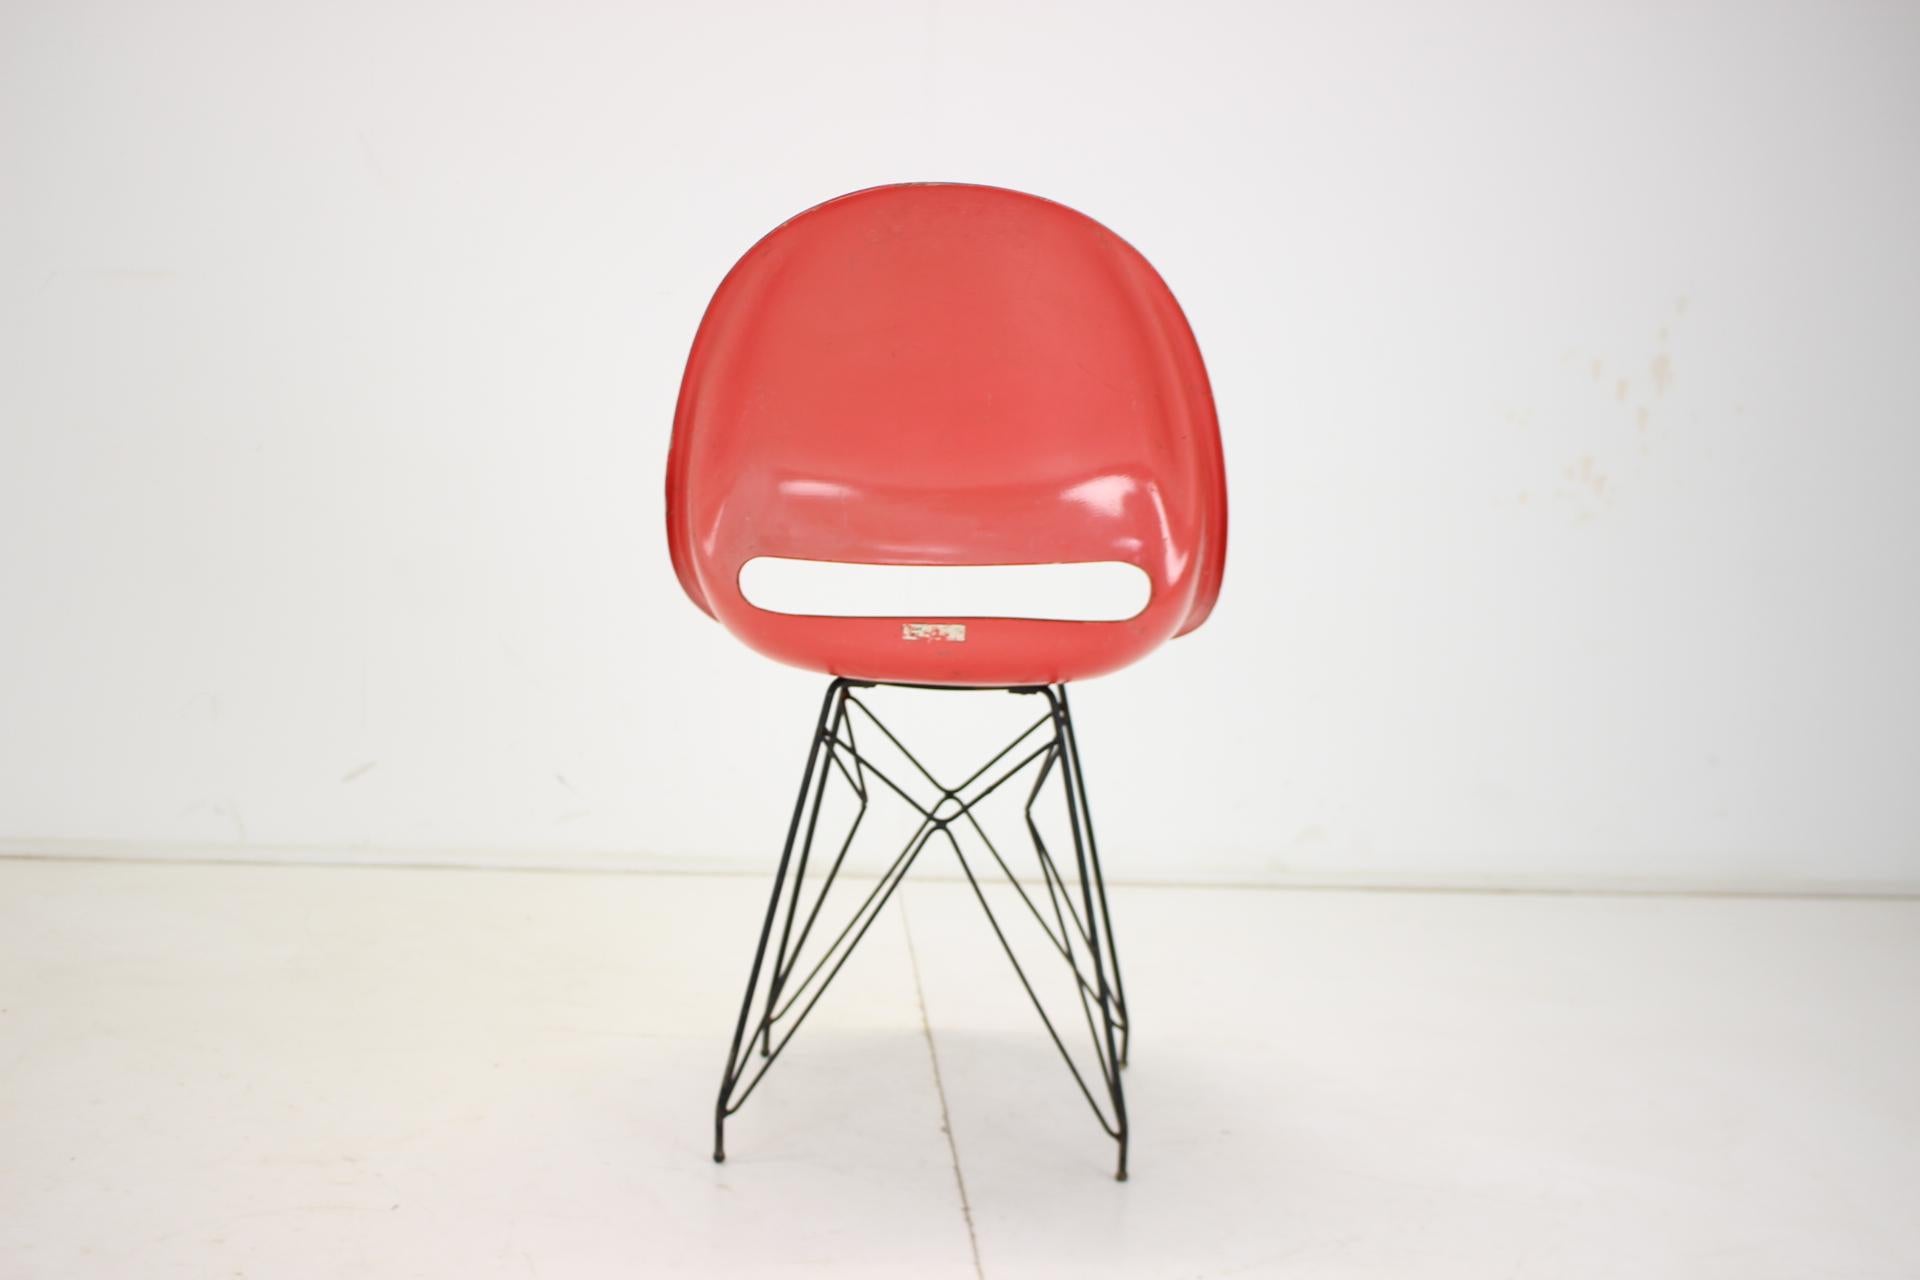 Midcentury Red Design Fiberglass Dining Chairs by M.Navratil, 1960s For Sale 2